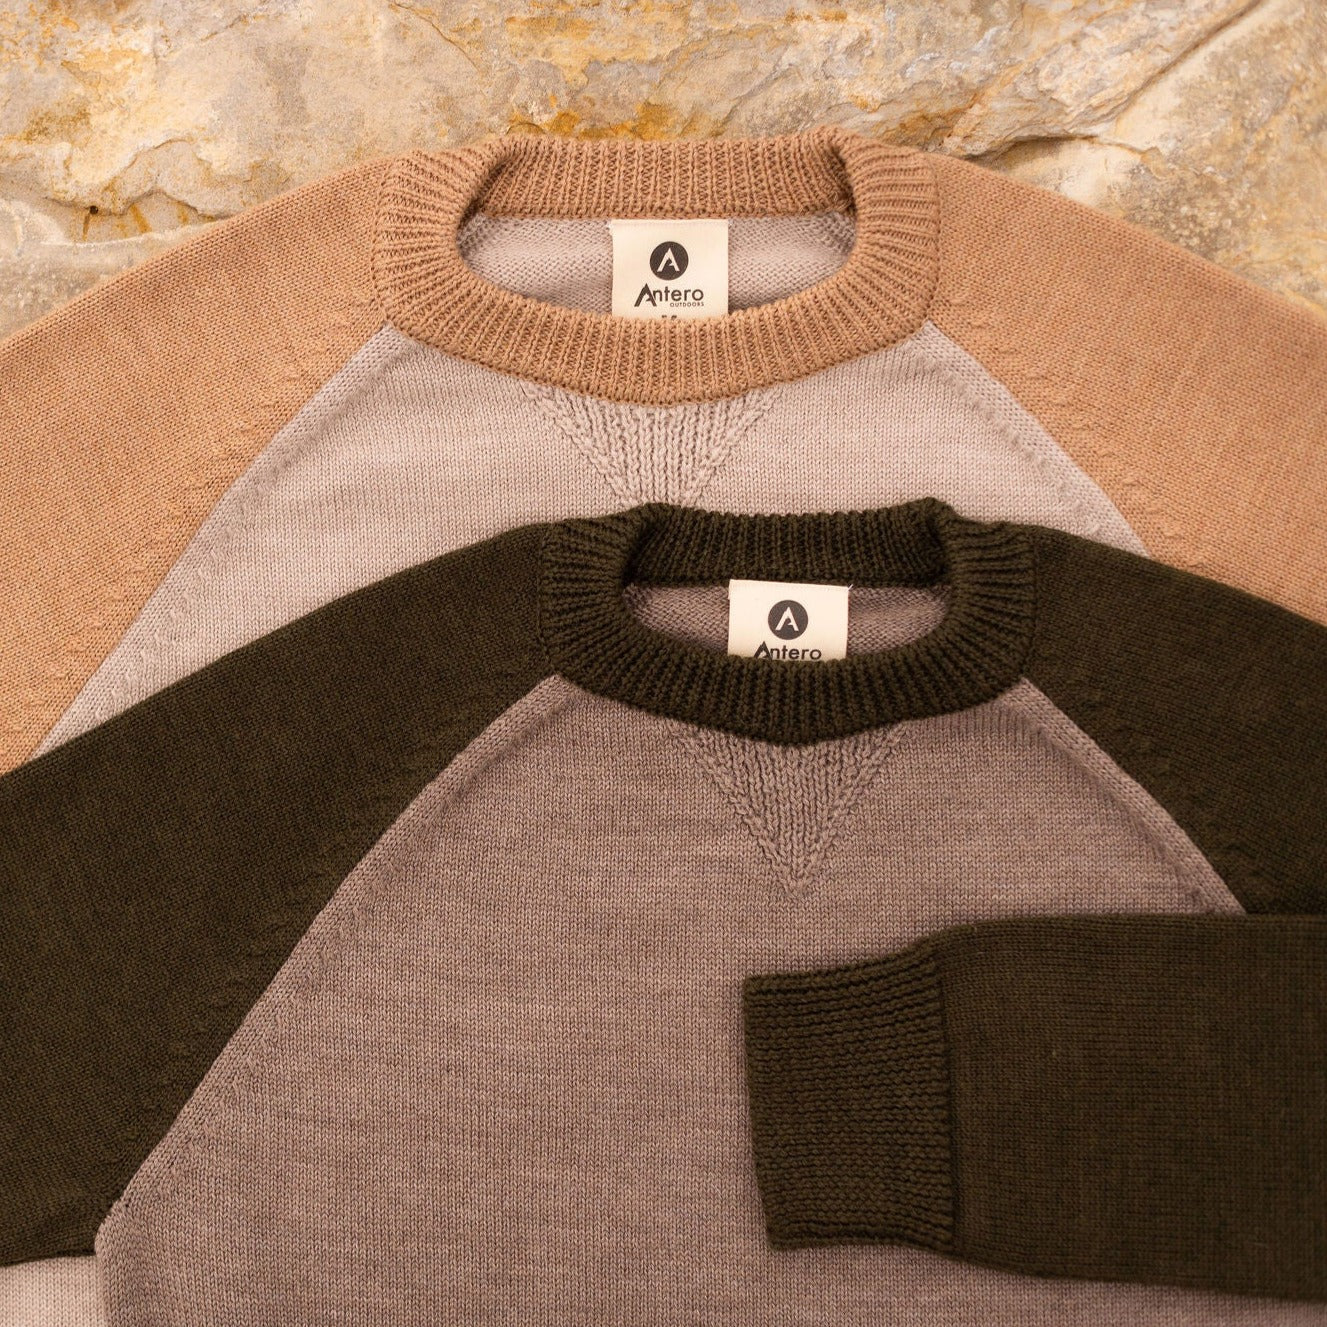 A comfortable classic in soft merino wool.  Knitted in the United States with fine Italian merino wool yarn.  The Colorado Sweater is sized unisex     Details  Made in the United States  100% merino wool  Classic fit / high crew neck  Contrast color raglan sleeve  2 colors:  sand/tan, olive/taupe  Unisex sizing